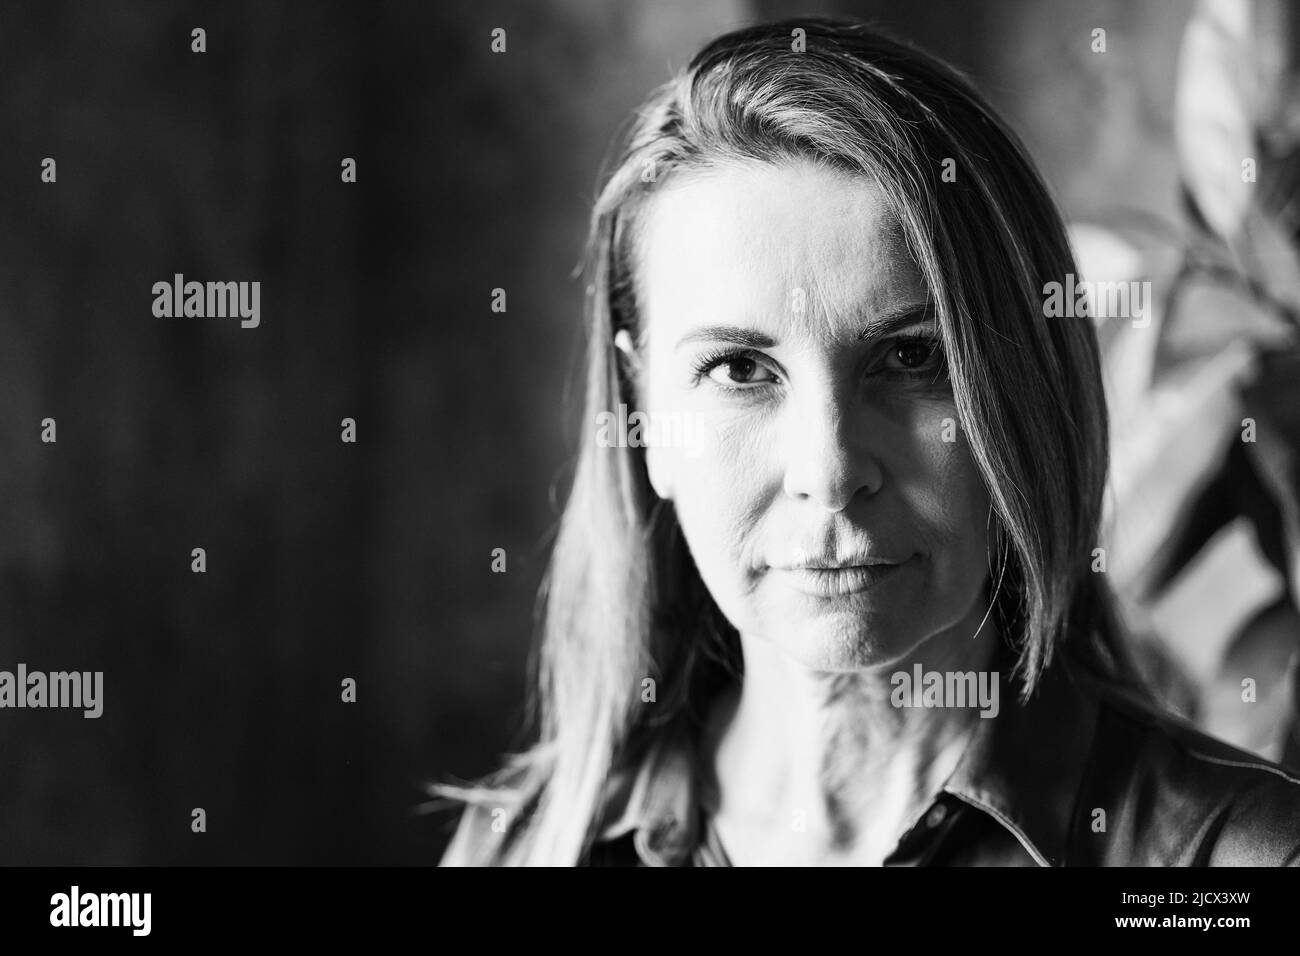 Senior business woman looking at camera - Focus on face - Black and white editing Stock Photo